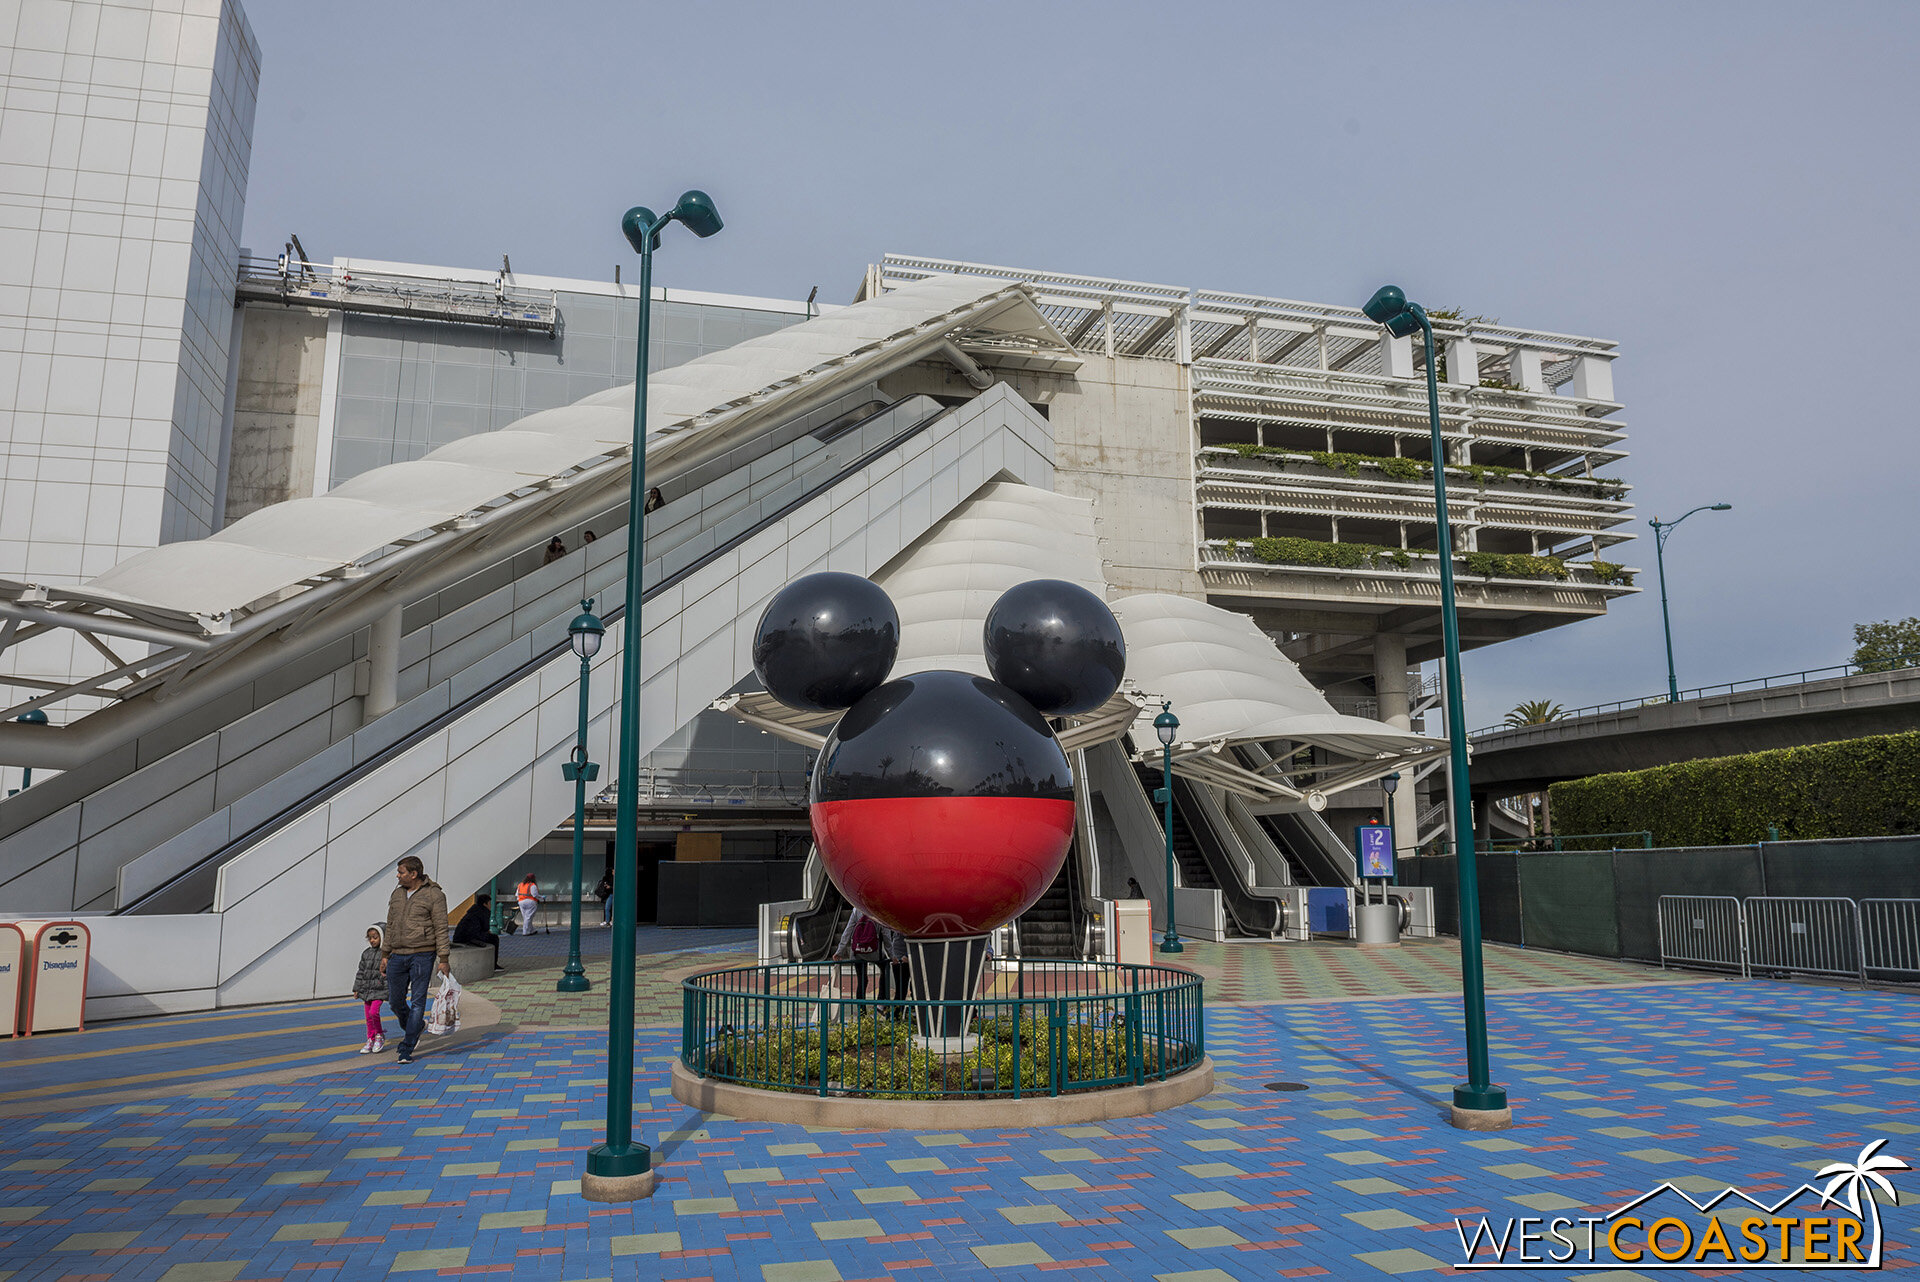  They’ve also added a “Mickey Ball” to mirror the Pixar Ball at the base of the Pixar Pals escalators. 